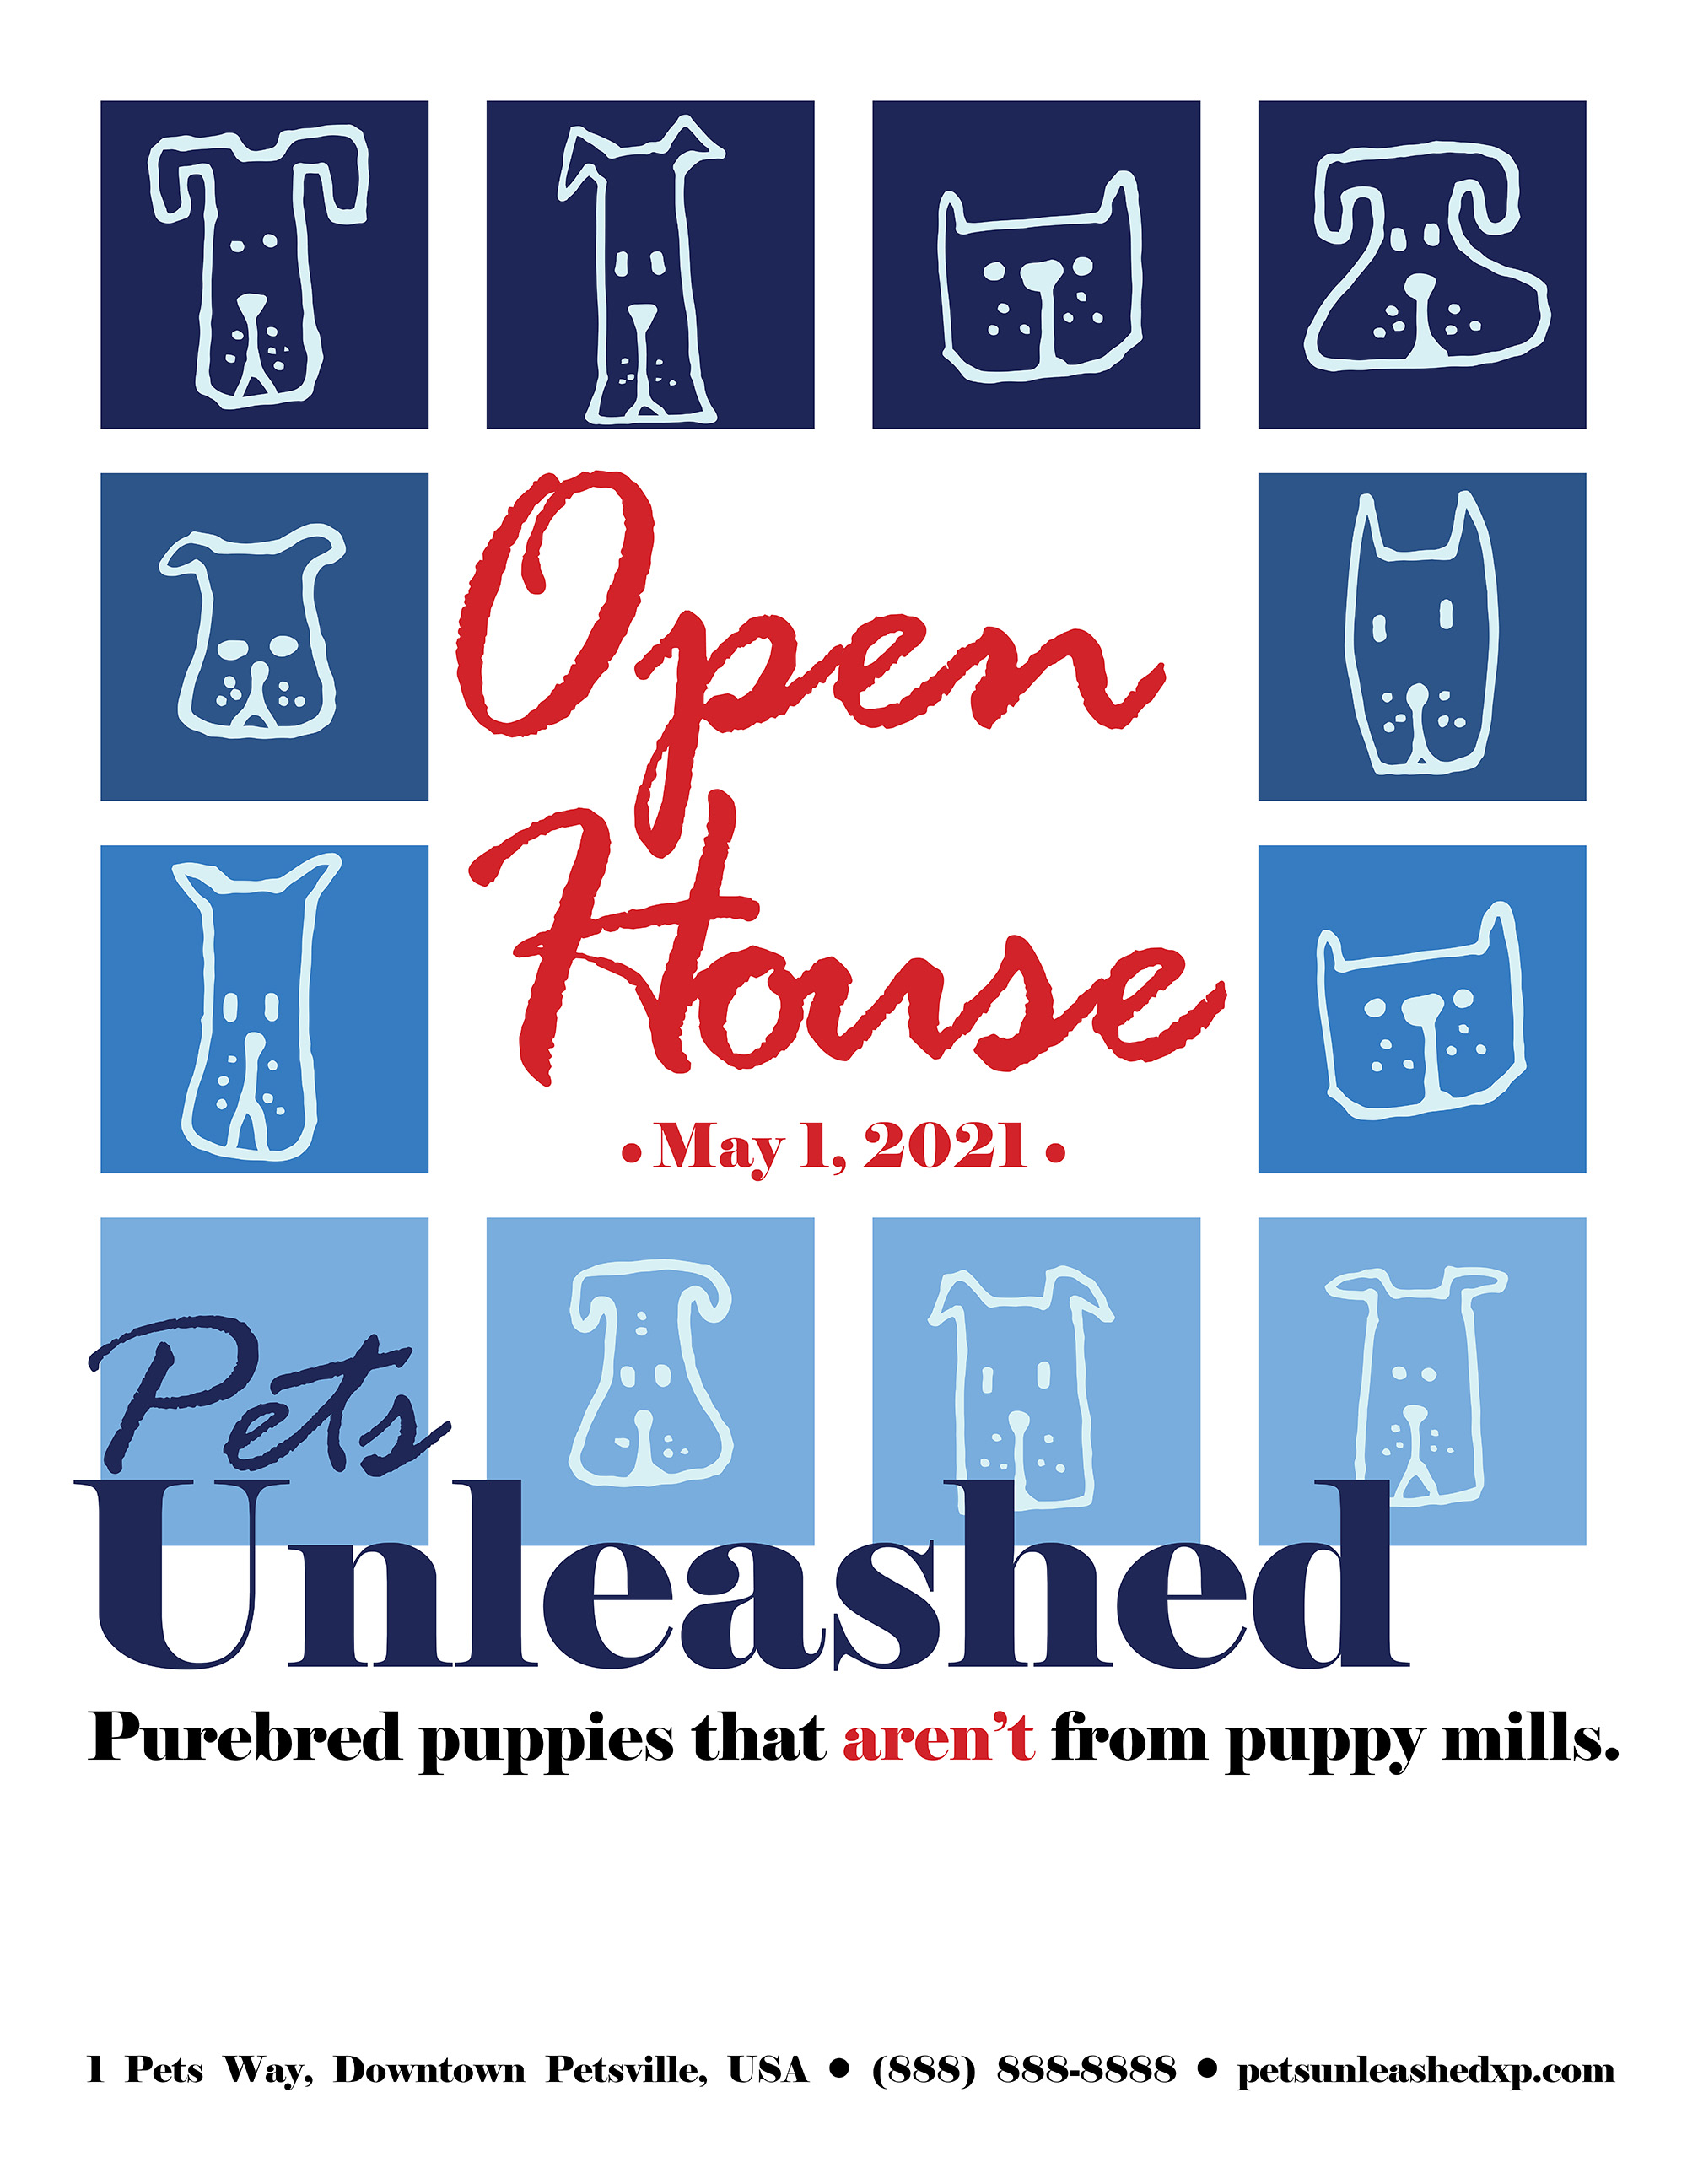 <b>Pets Unleashed Flyer</b><br>
      <i>Created using InDesign.</i><br> 
      Modern pet owners no longer embrace the "cheap, fast, easy" methods of puppy mill breeders. This poster was designed to show the pet store in a modern light, away from the negatives associated with the "old ways".